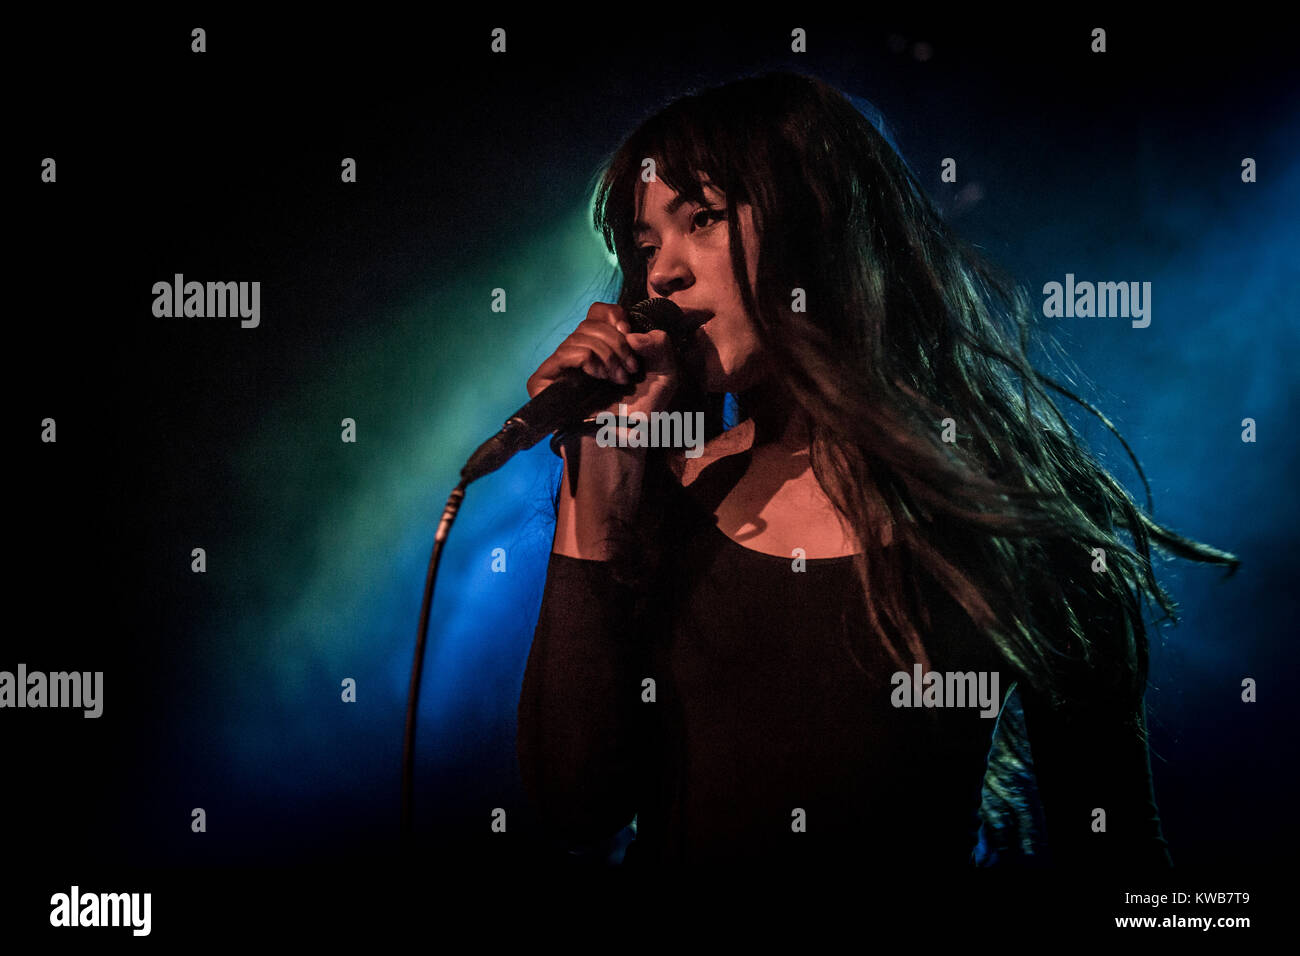 The Danish-Zambian R&B and electro pop singer Kwamie Liv performs a live concert at VEGA in Copenhagen. Kwamie Liv is among the most exciting new talents in Denmark and is already a well-known artist abroad. Denmark, 30/01 2015. Stock Photo